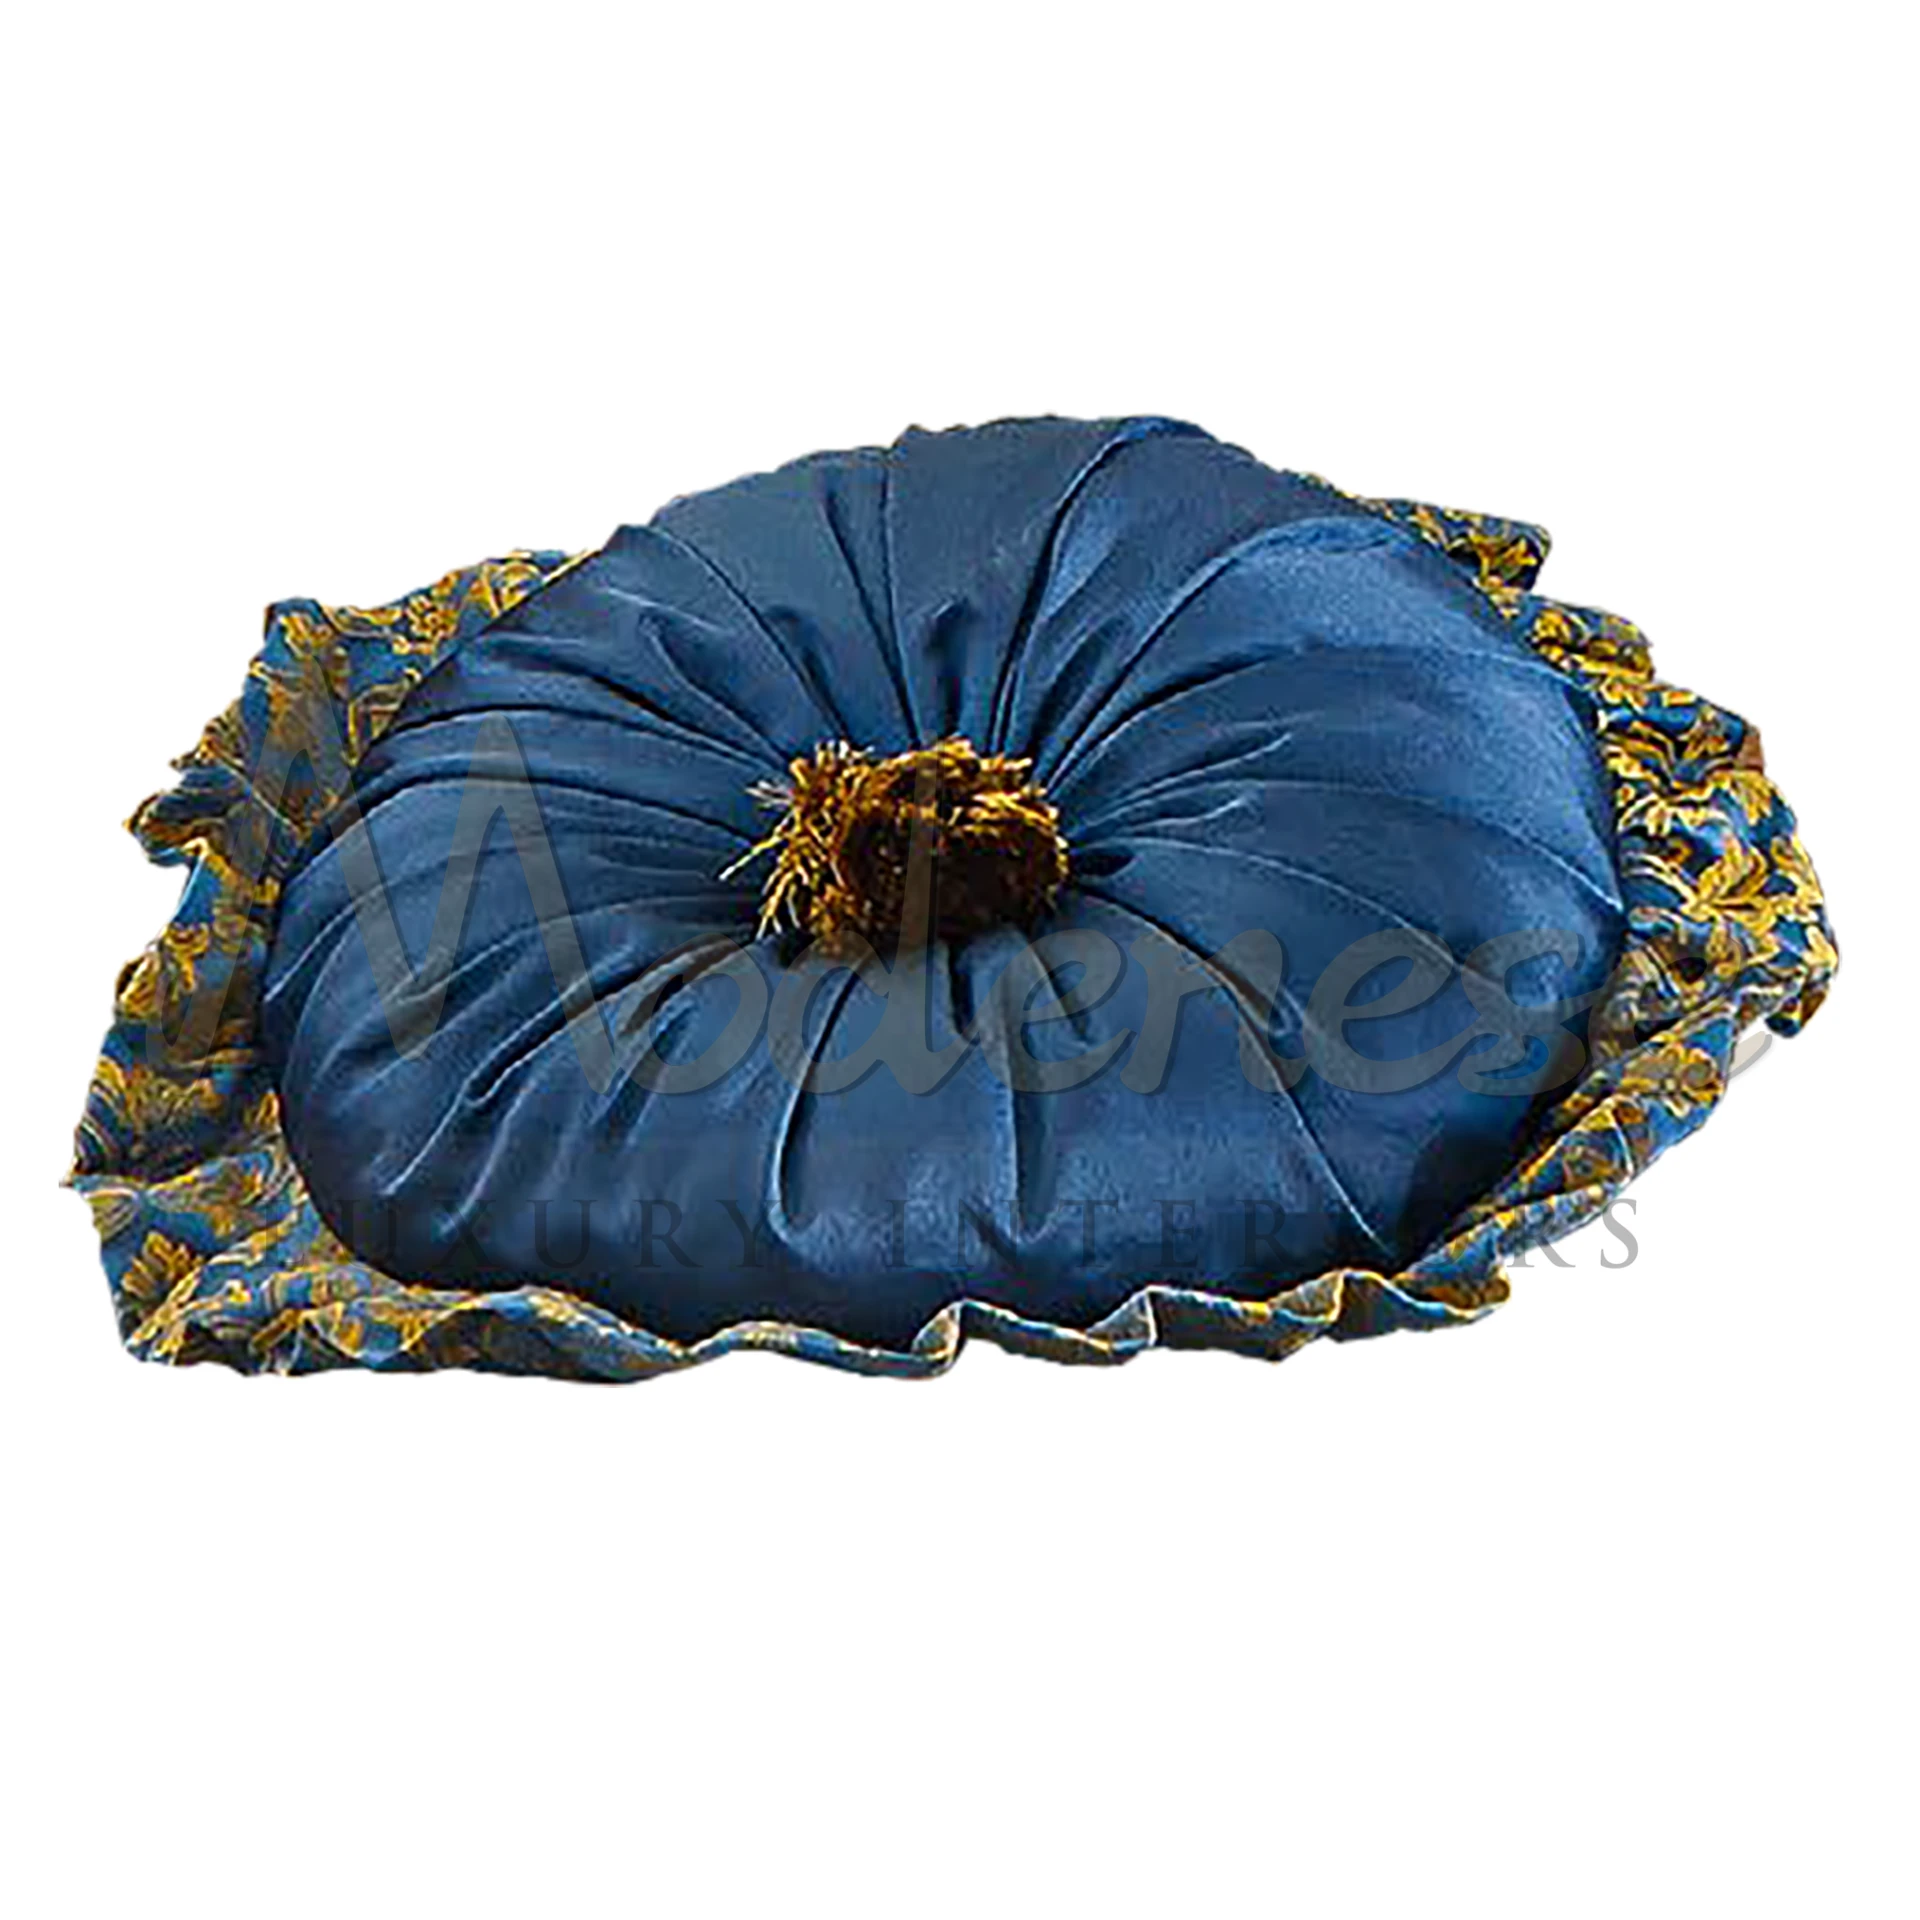 Classical Round Blue Pillow with harmonious design, clean lines, and balanced proportions, showcasing Italian luxury.